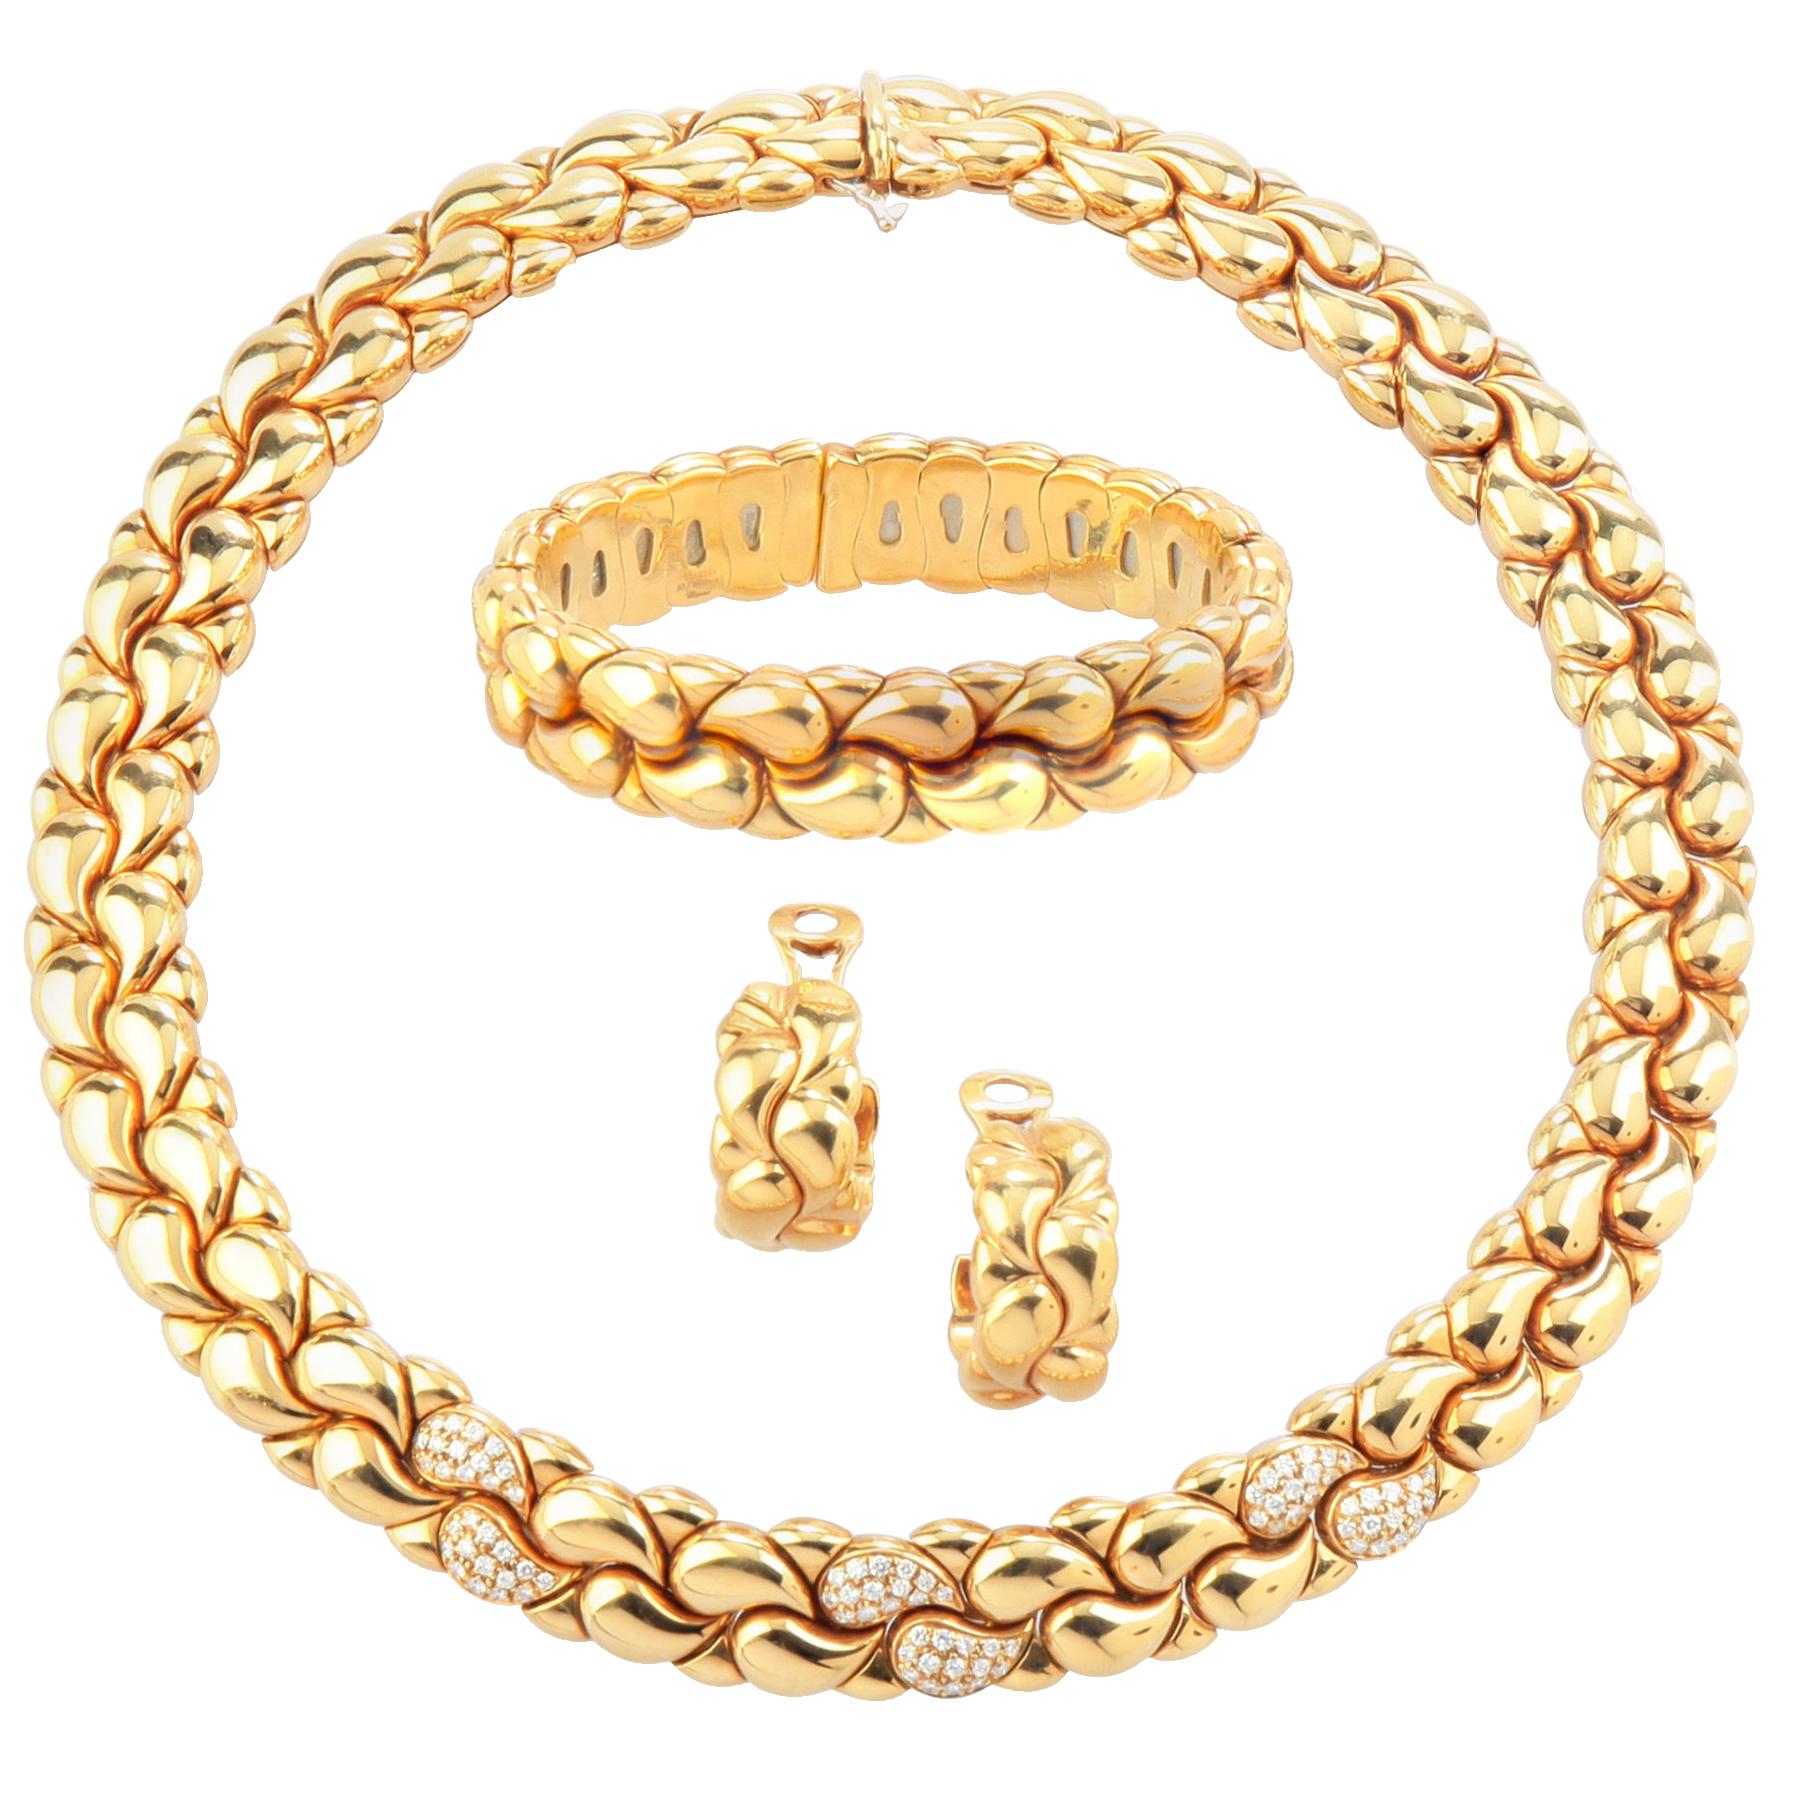 Gold and Diamond ‘Casmir’ Parure by Chopard